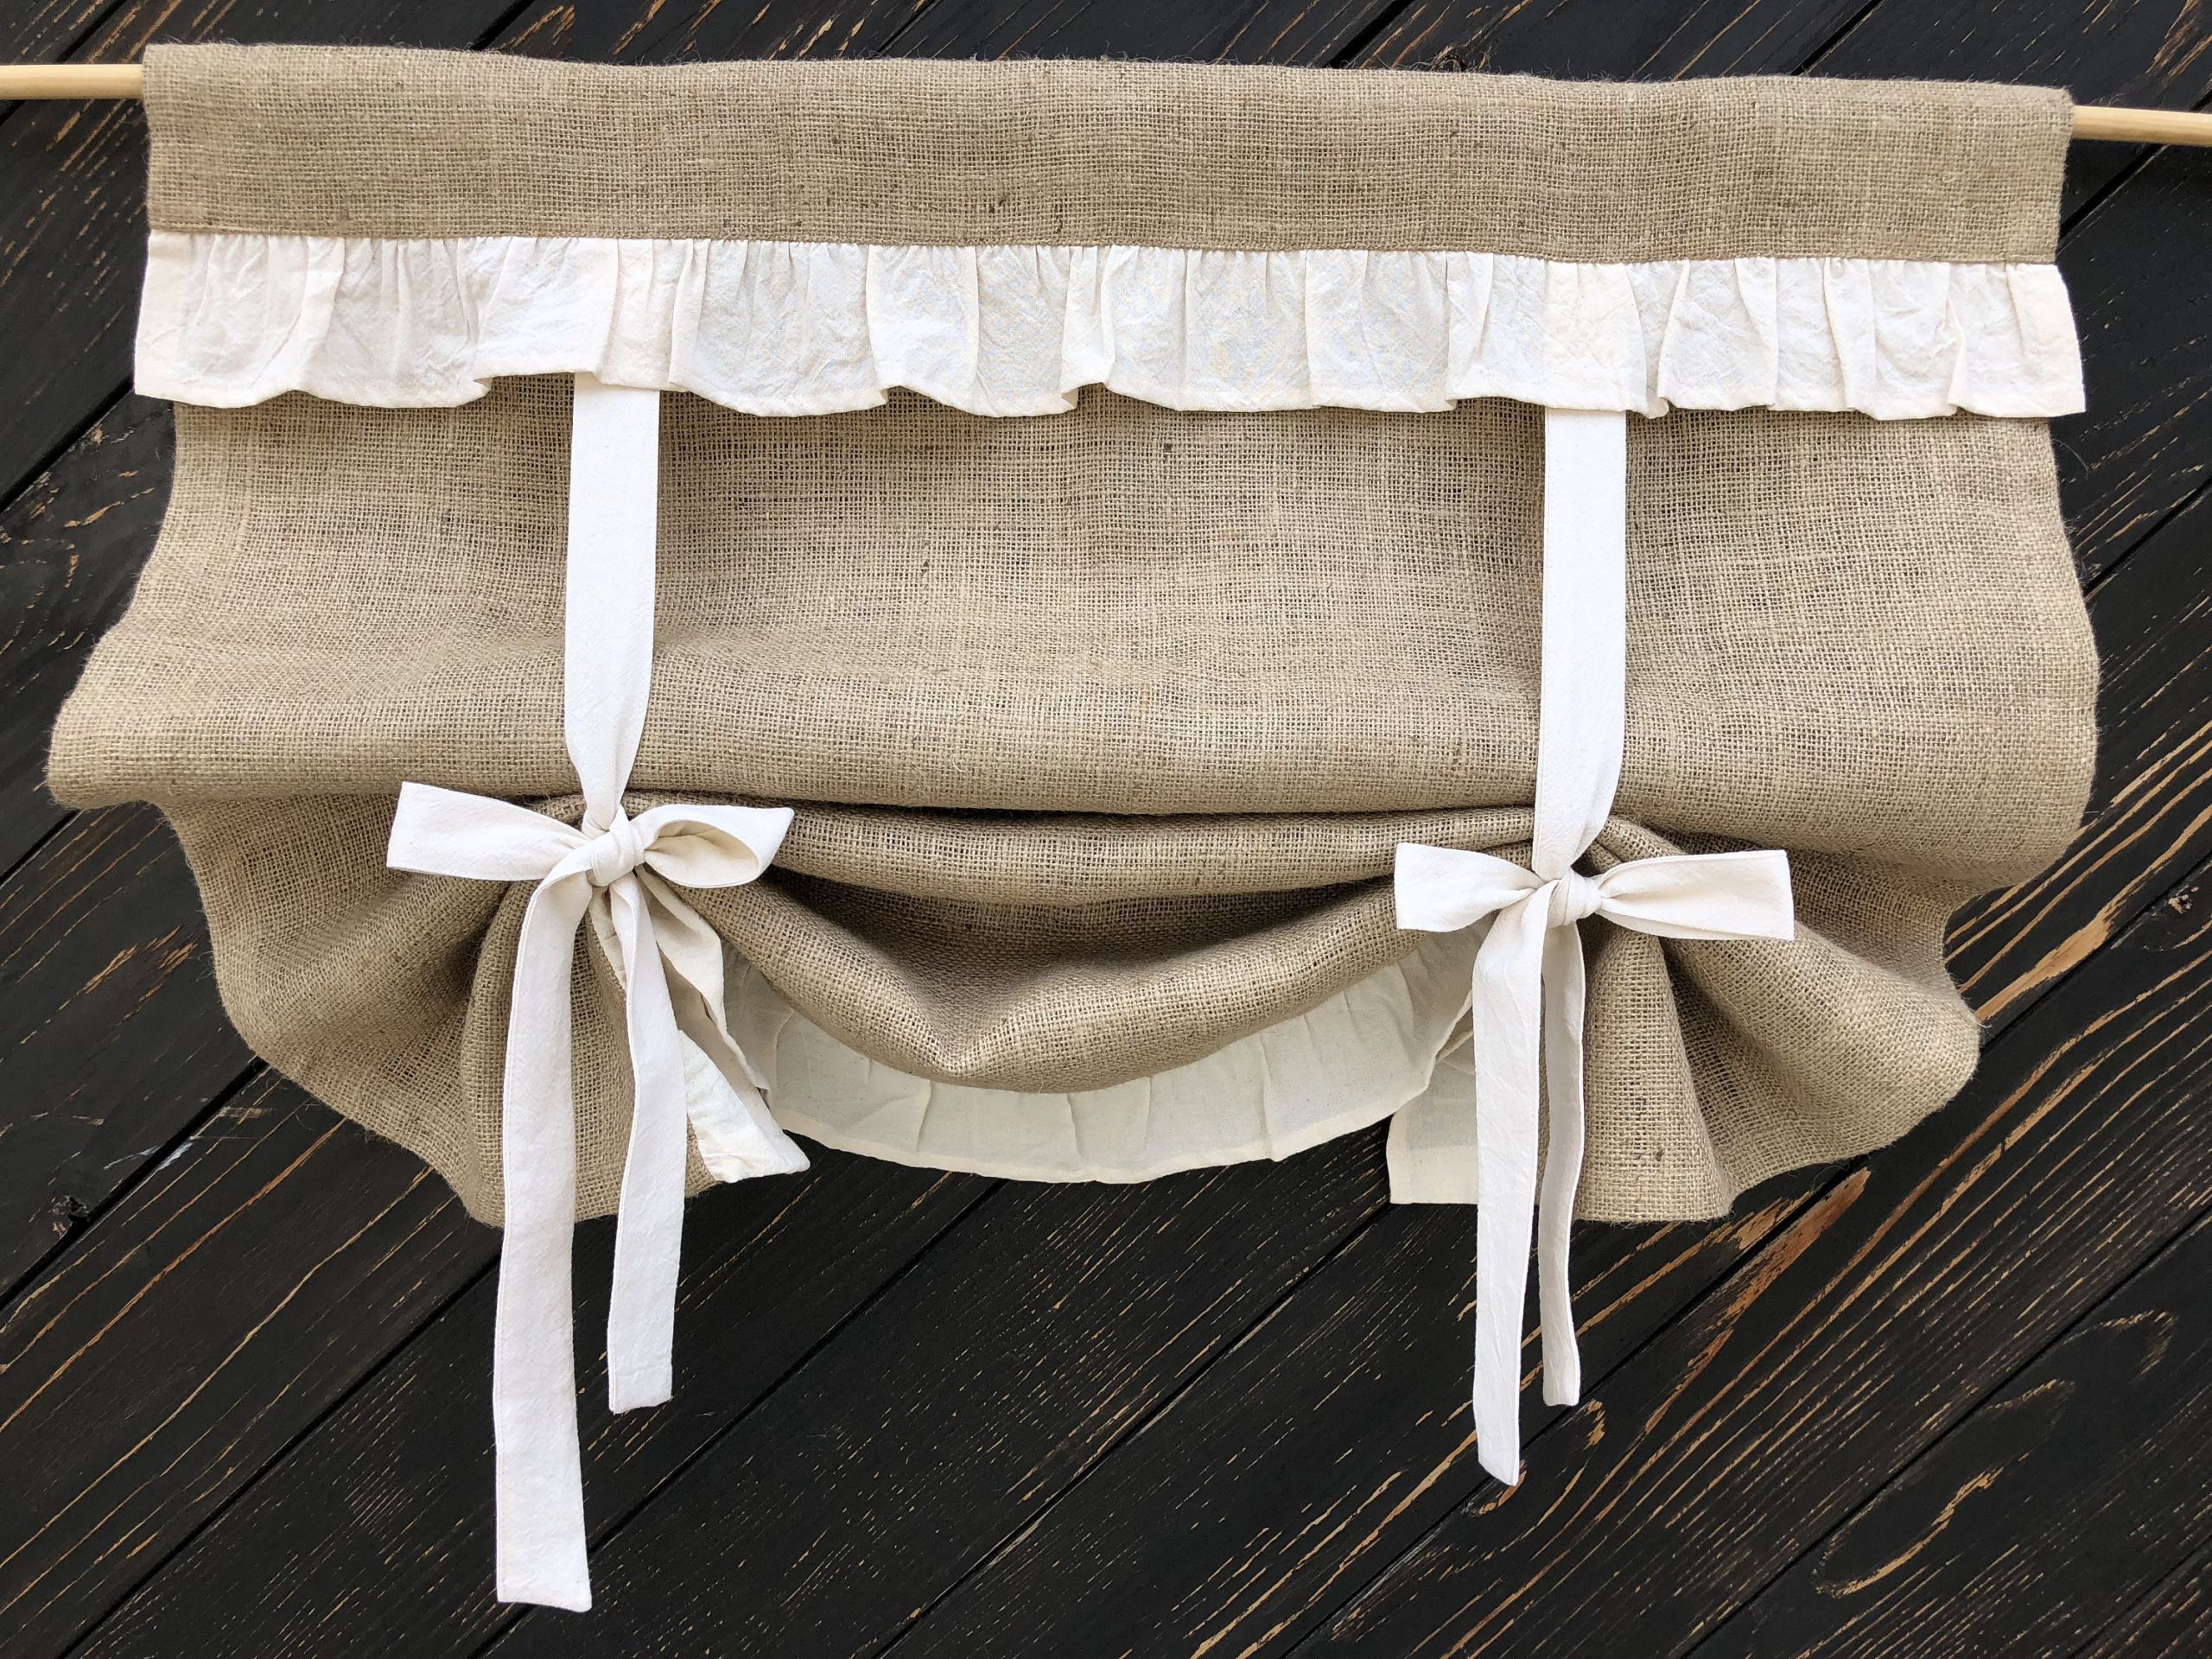 Tie Up Kitchen Curtains
 Burlap Curtains Ruffled Country Kitchen Tie Up Valance